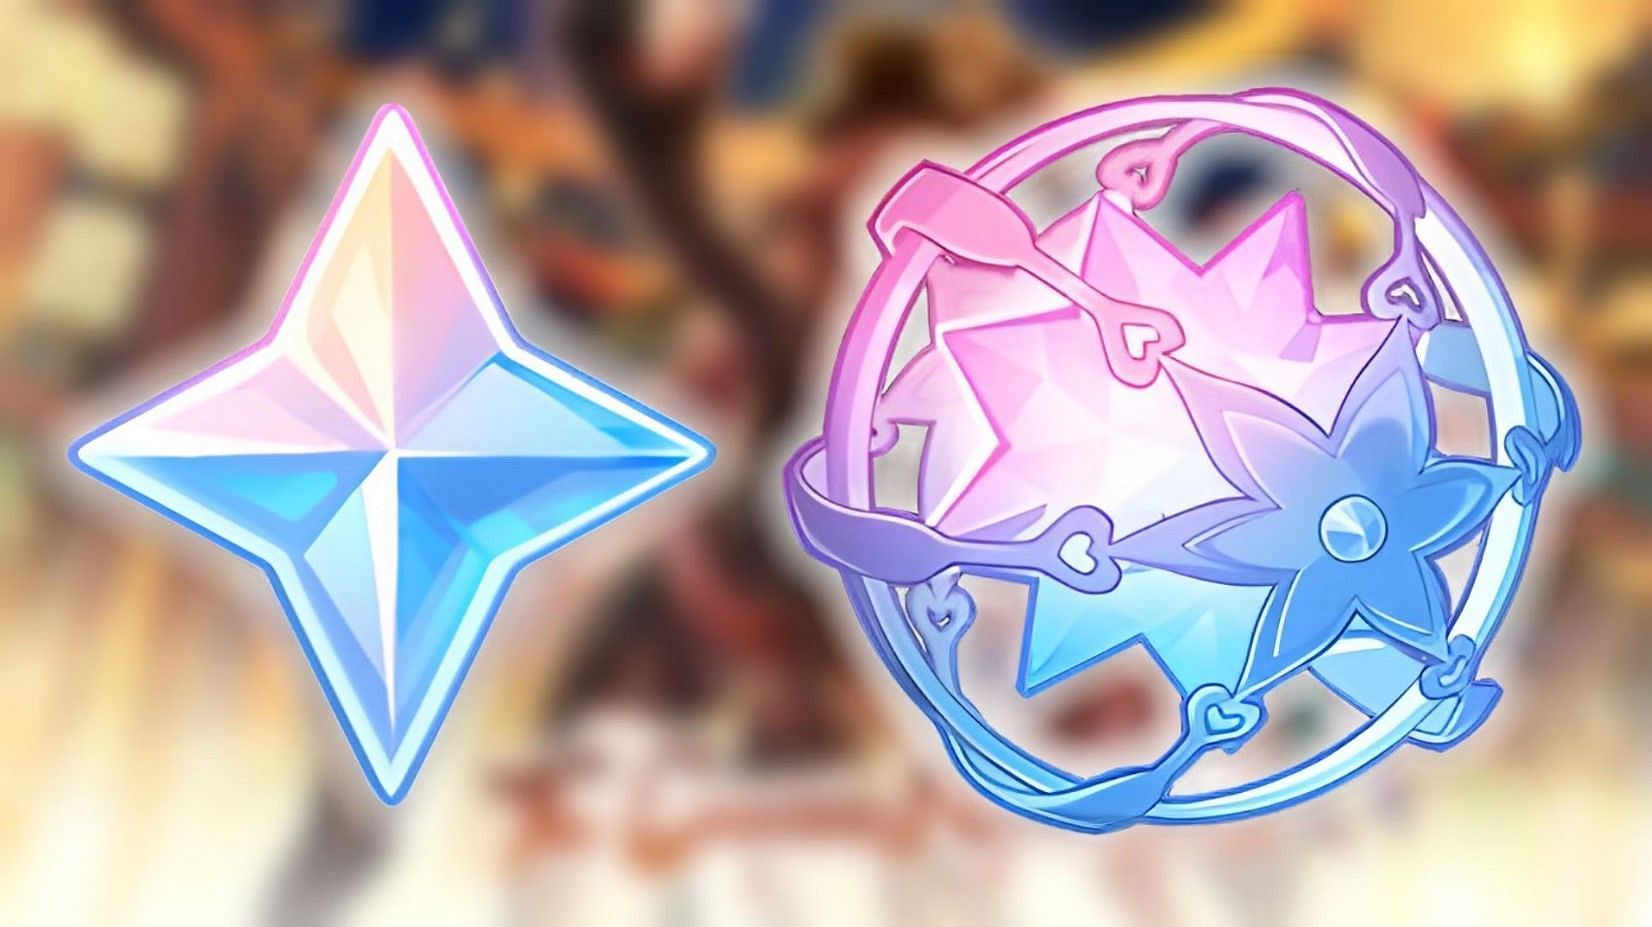 Players can convert Primogems to Interwined Fates to pull for characters and weapons (Image via HoYoverse)